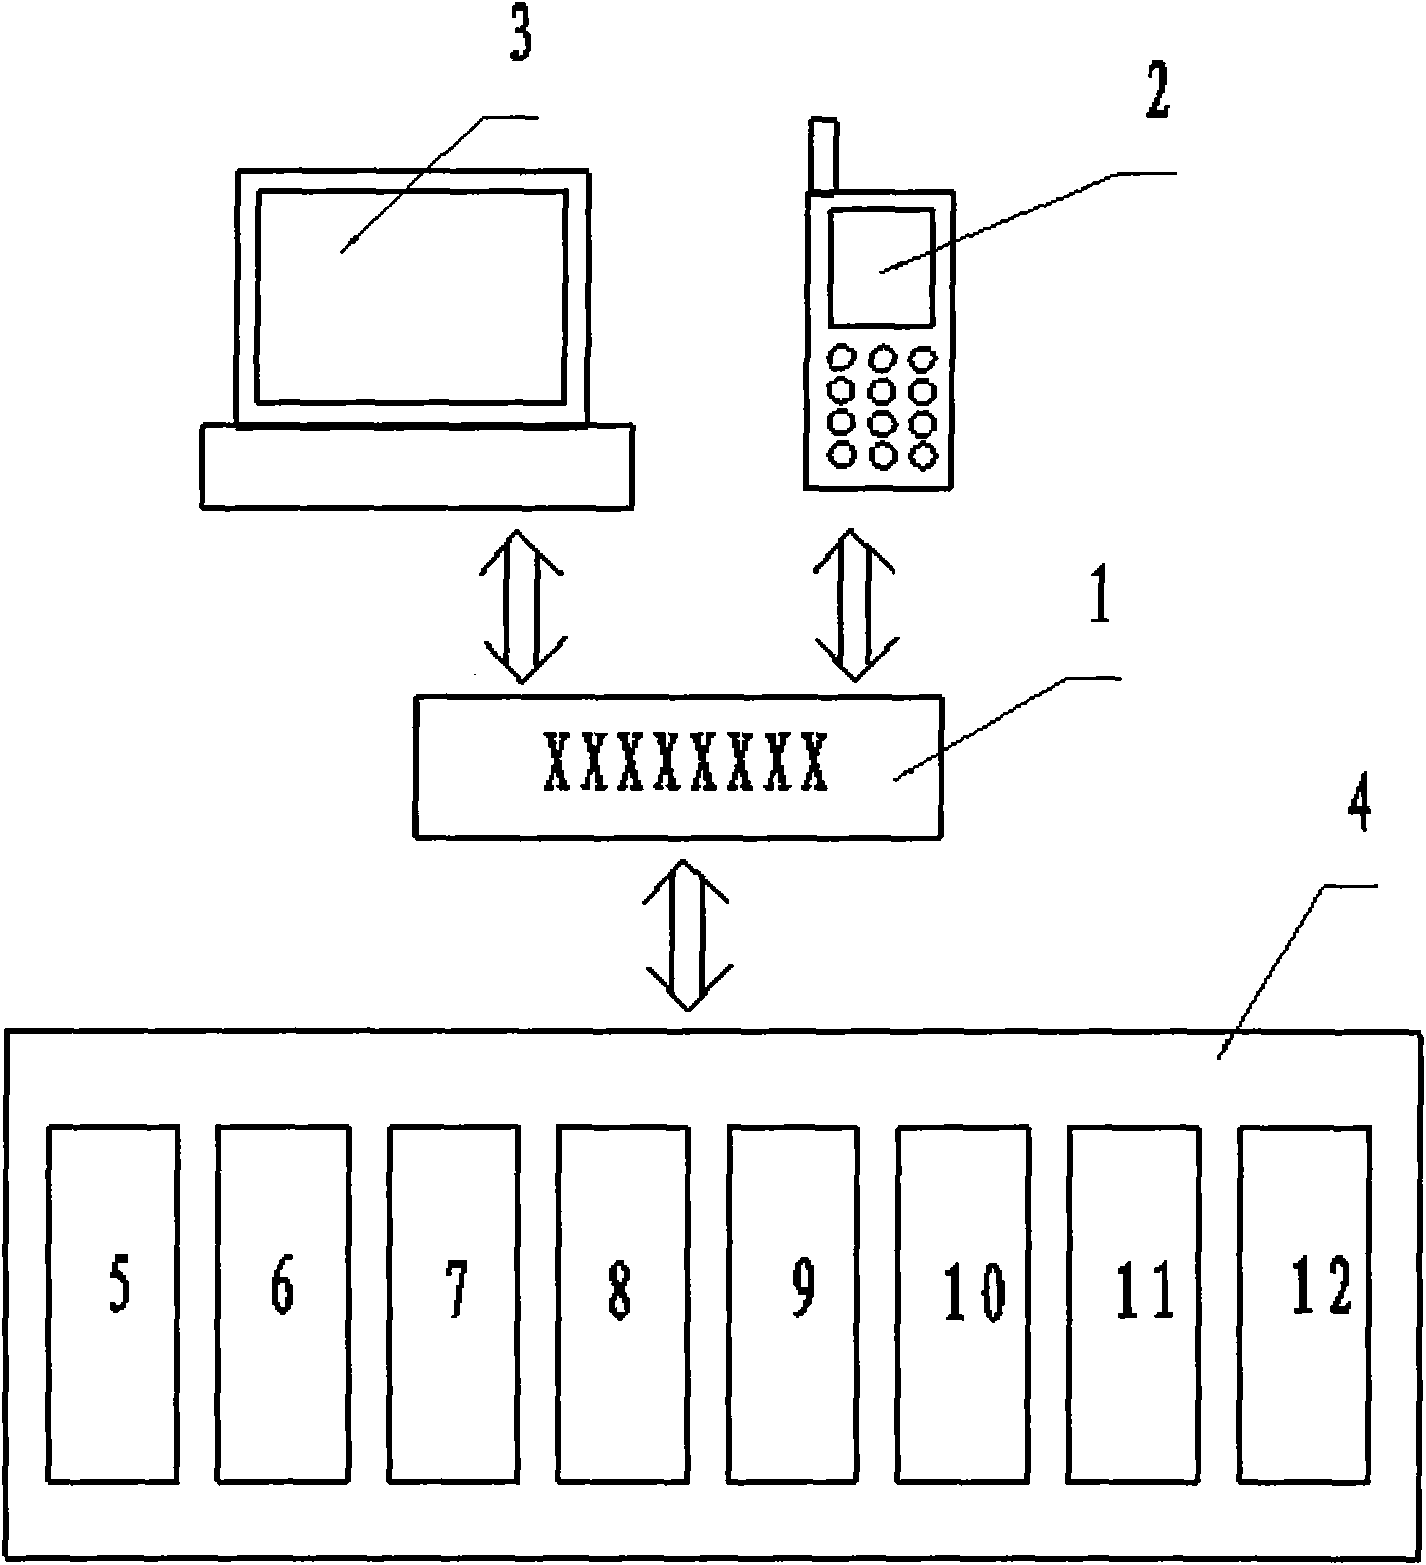 System and method for querying health archive by using communication number